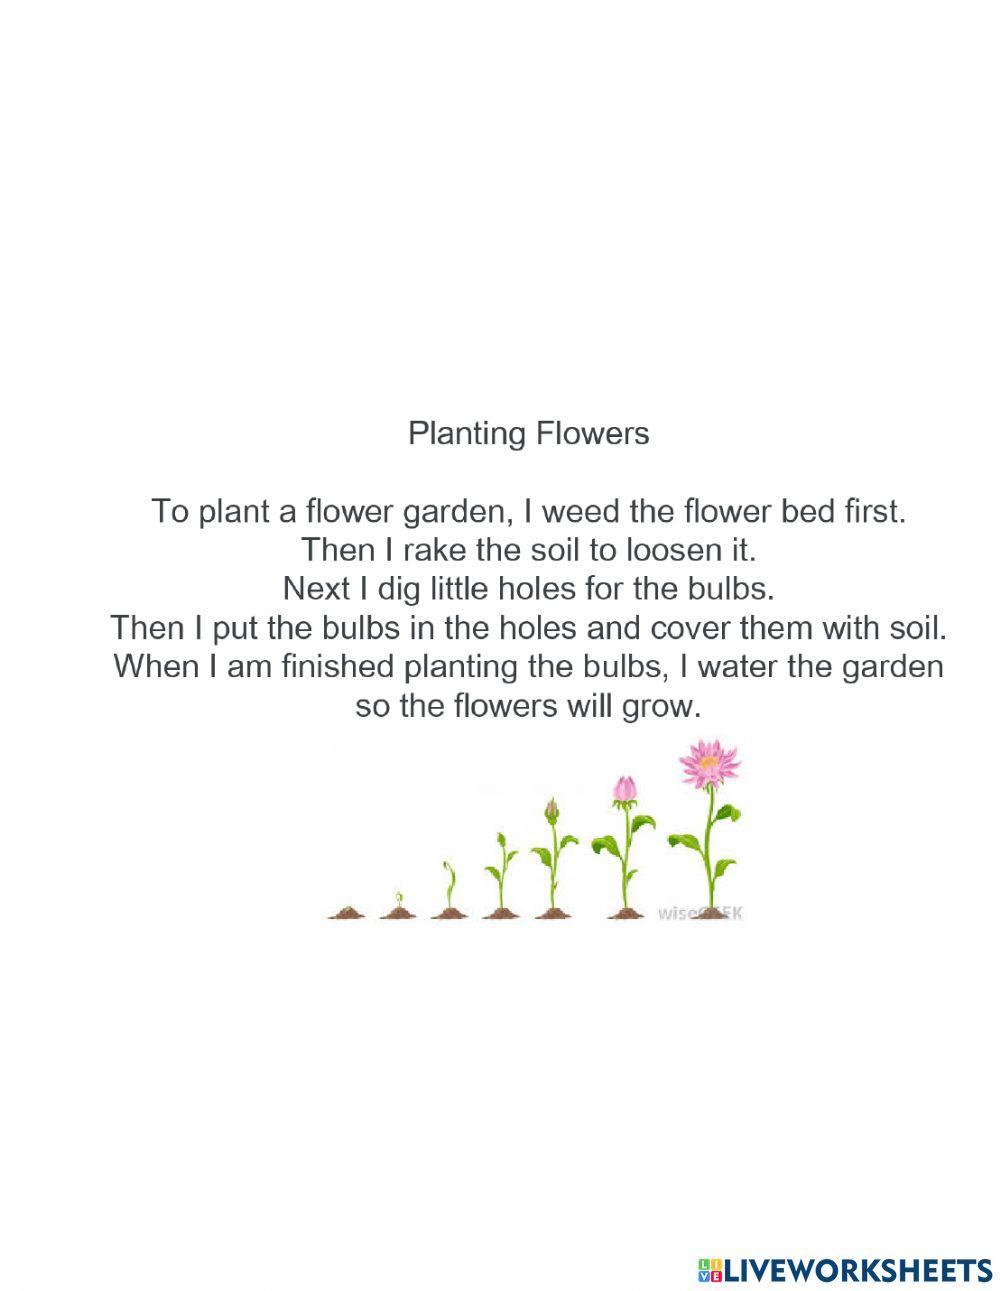 Planting flowers sequencing